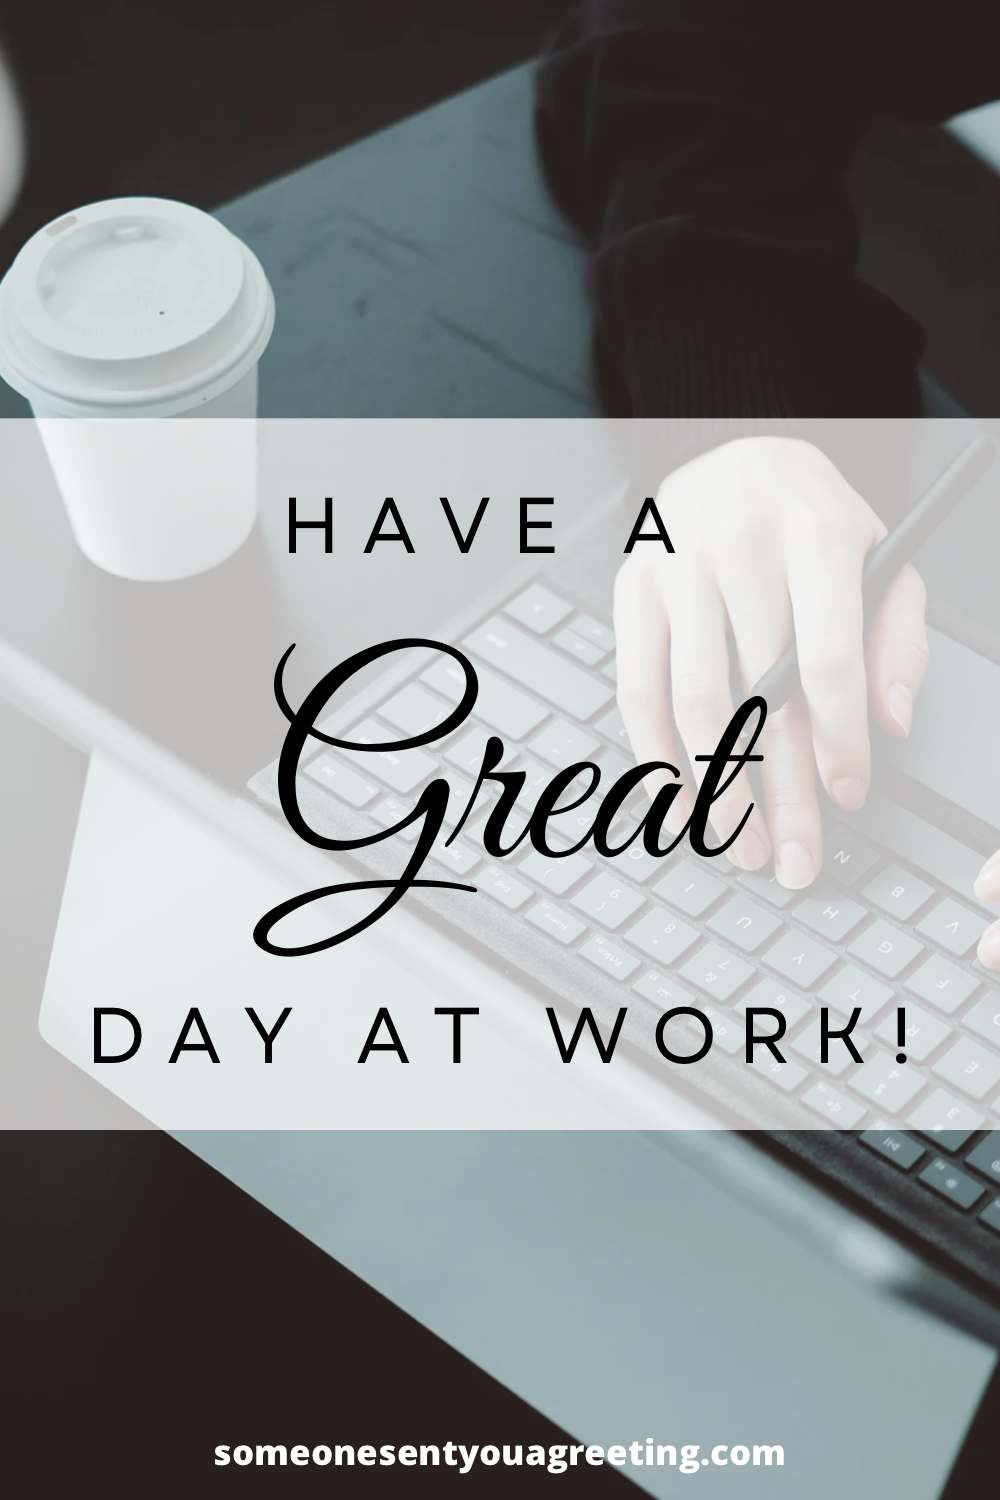 47 Have a Great Day at Work Messages - Someone Sent You A Greeting